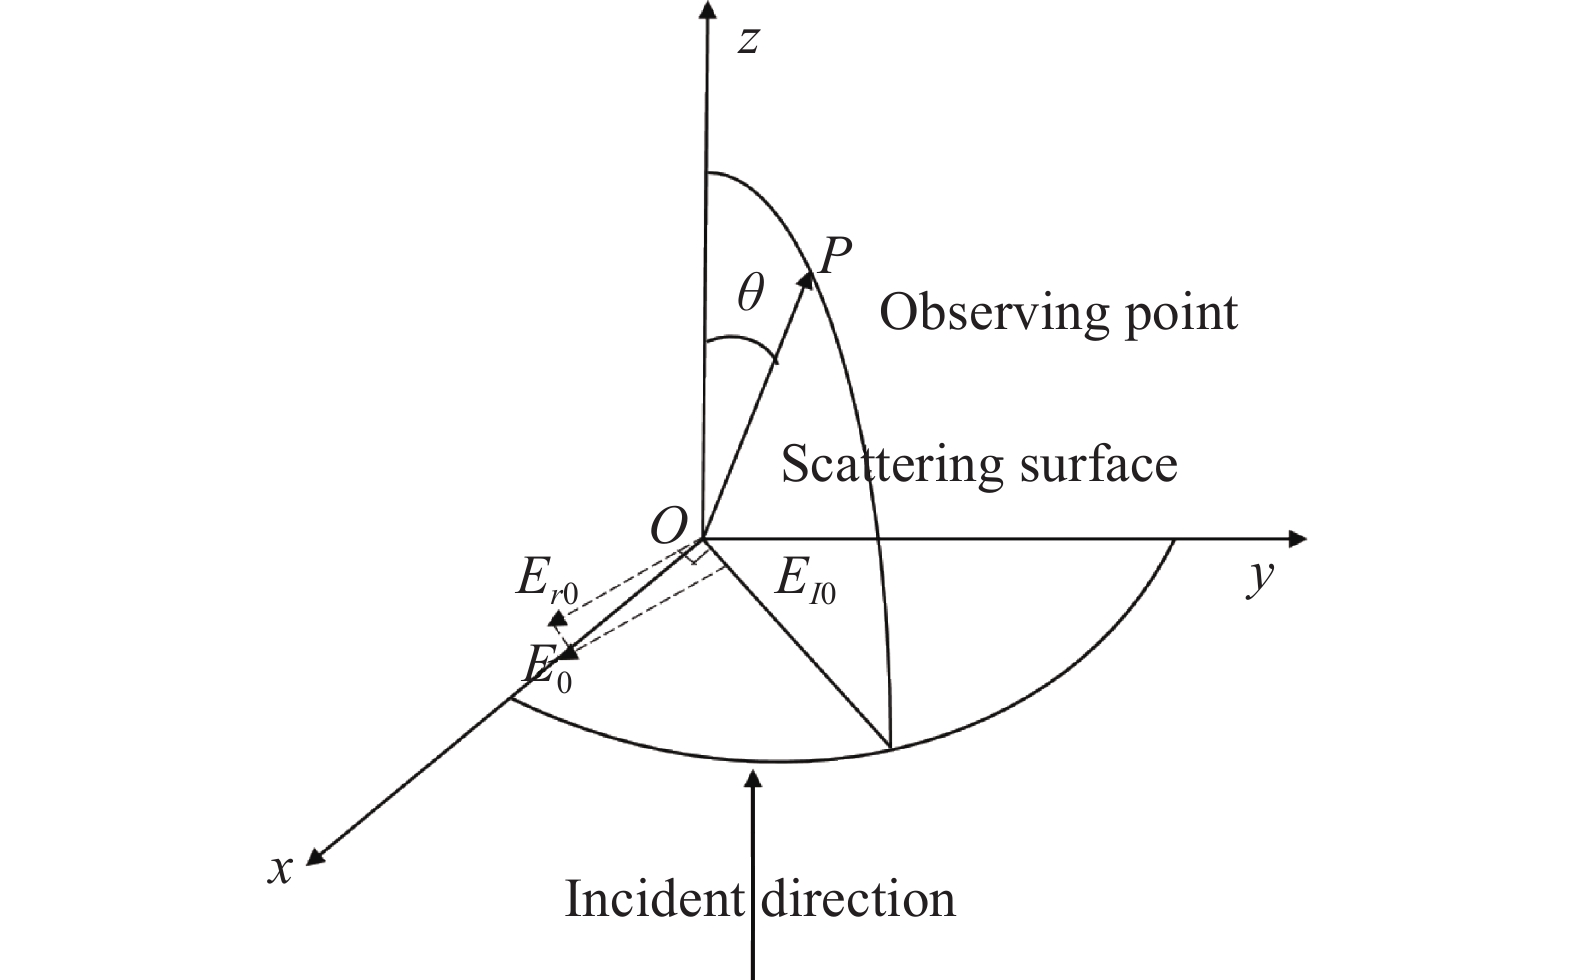 Mie scattering model